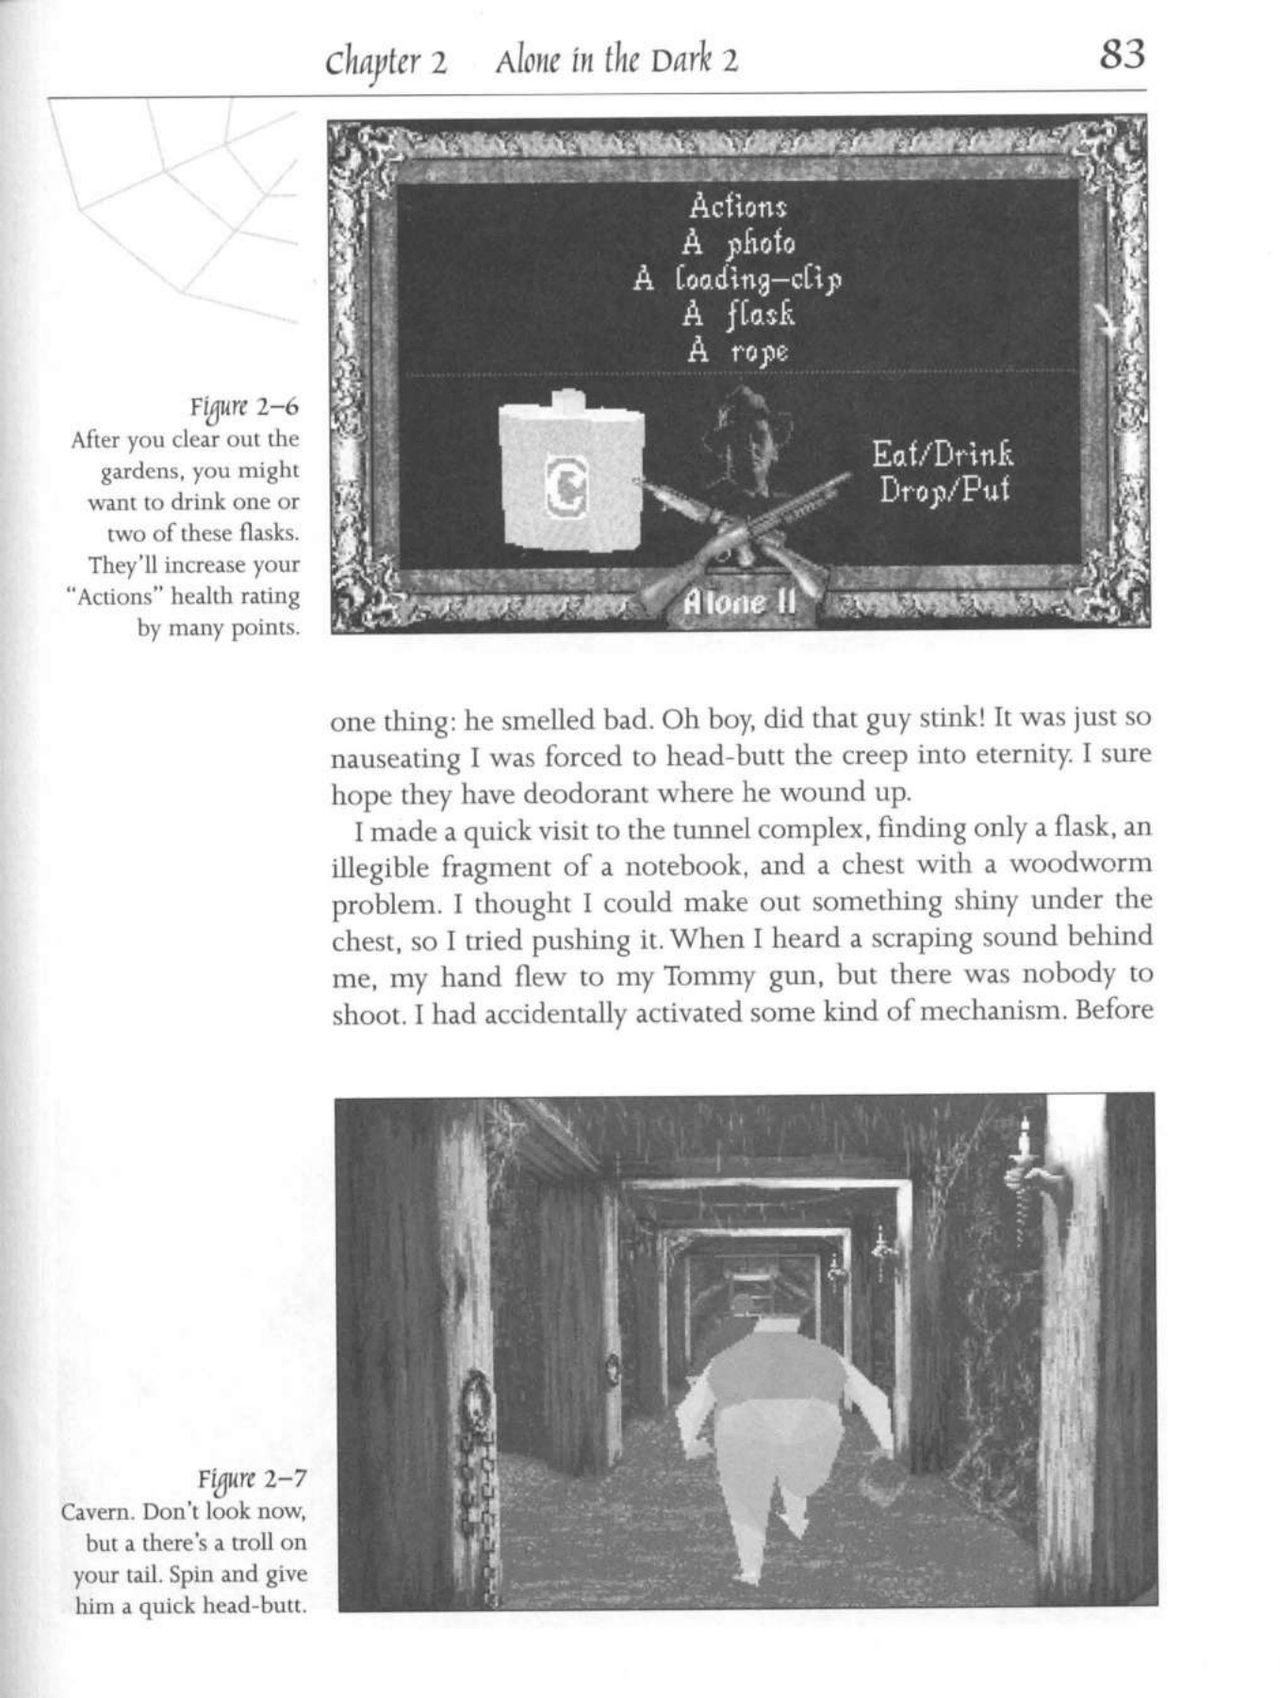 Alone in the Dark 1 and 2 Strategy Guide 95